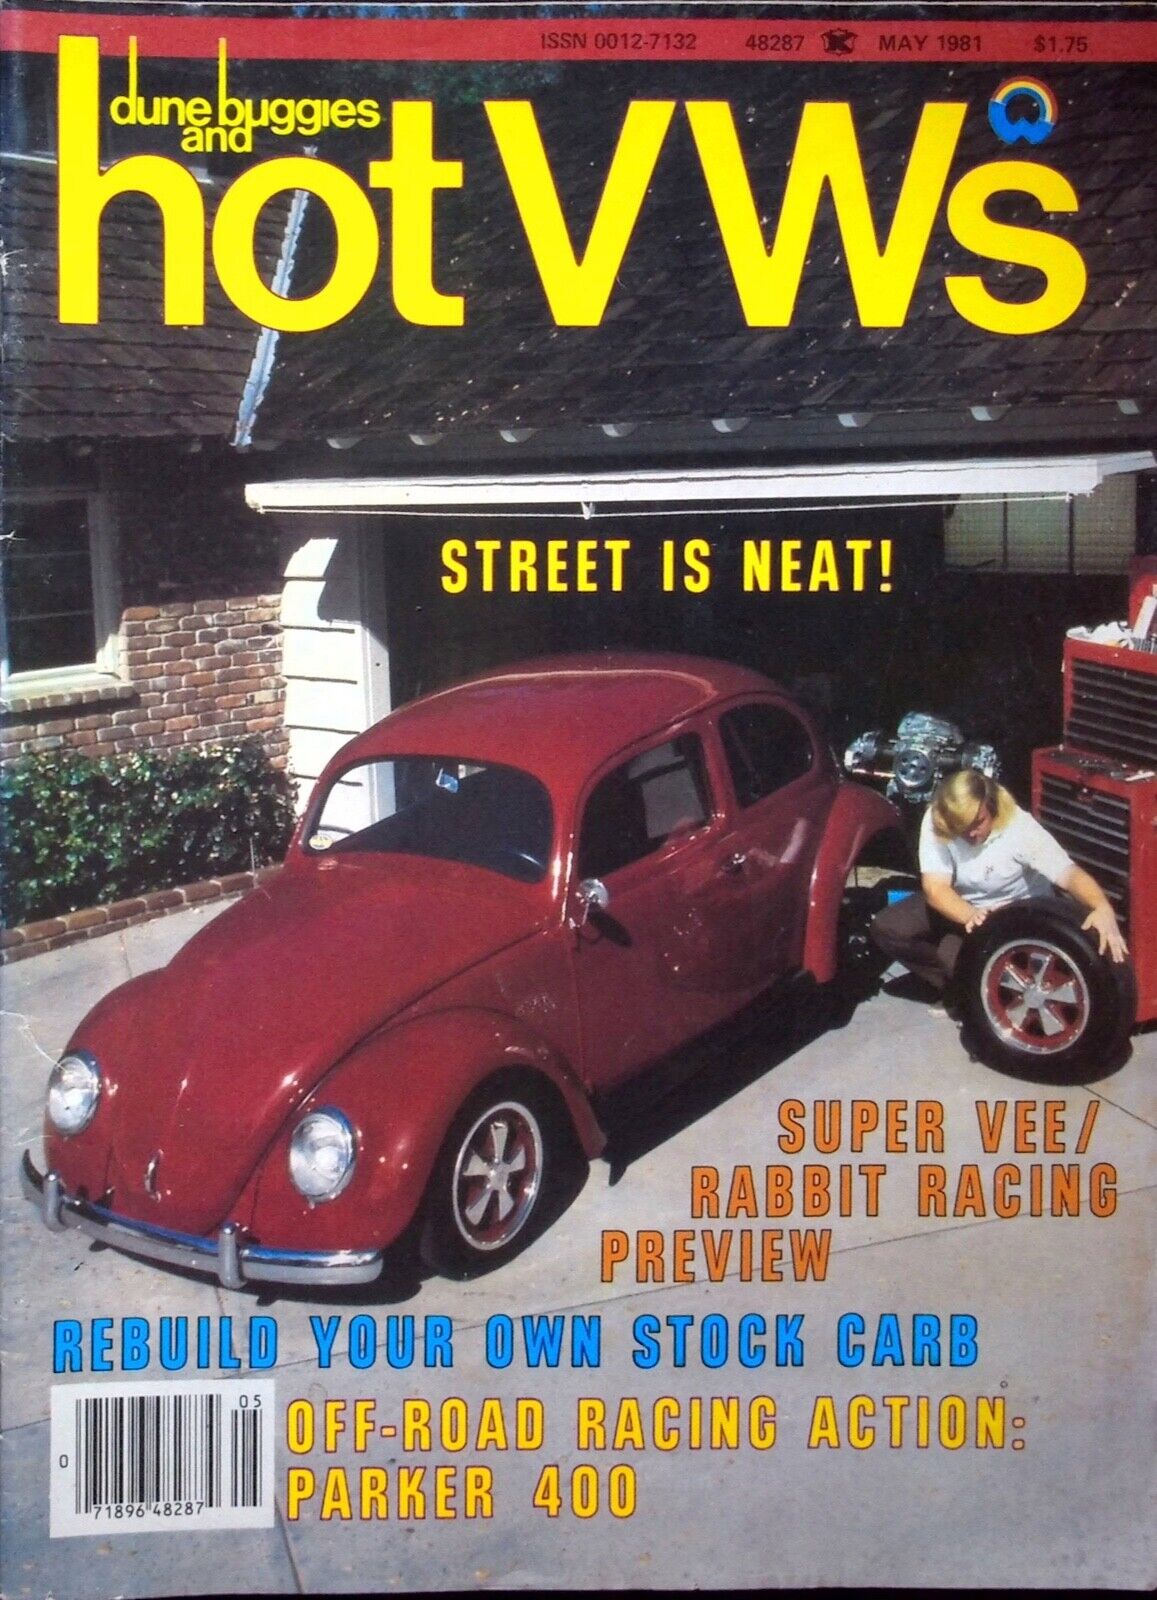 REBUILD YOUR OWN STOCK CARB - HOT VW'S MAGAZINE, VOLUME 14, NO 5, MAY 1981 VTG